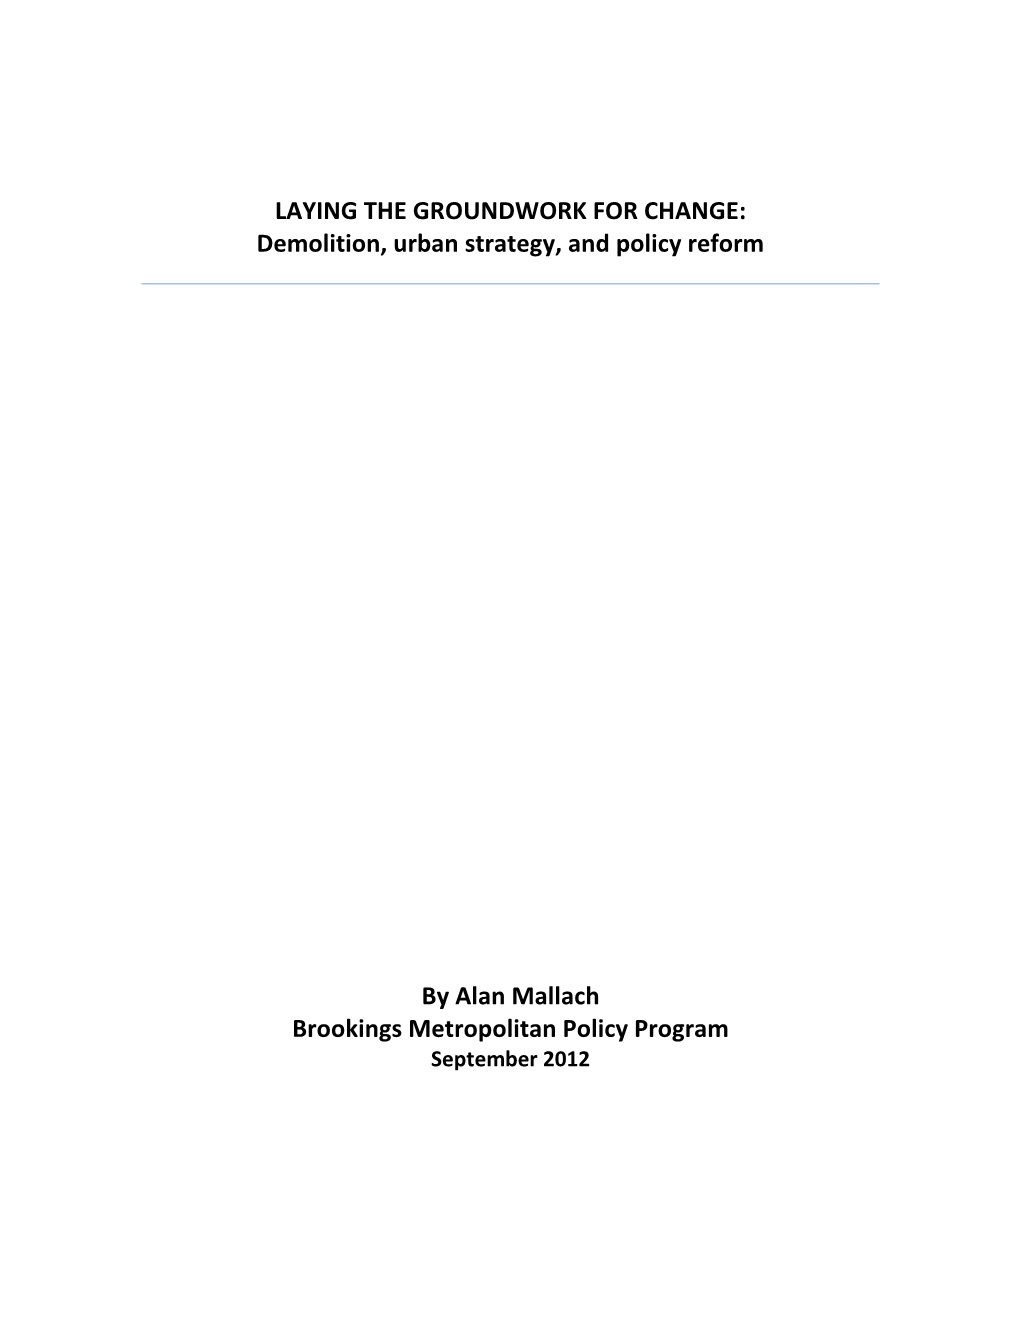 LAYING the GROUNDWORK for CHANGE: Demolition, Urban Strategy, and Policy Reform